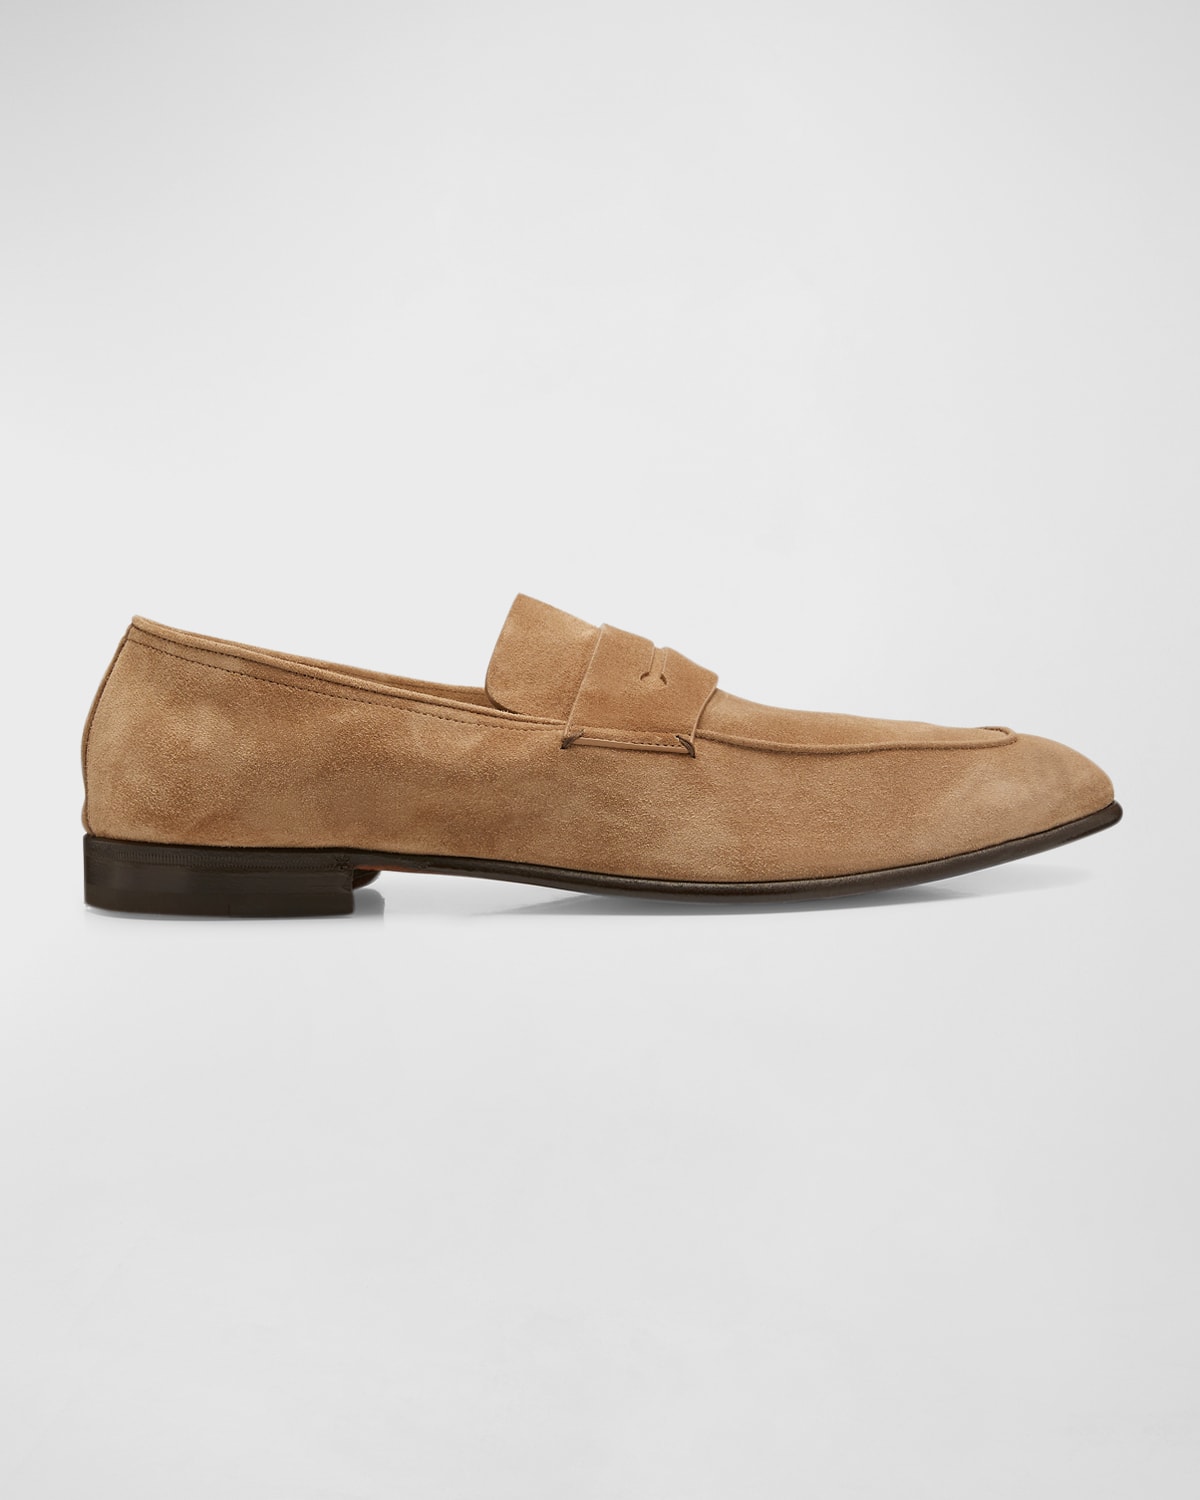 ZEGNA MEN'S SUEDE PENNY LOAFERS